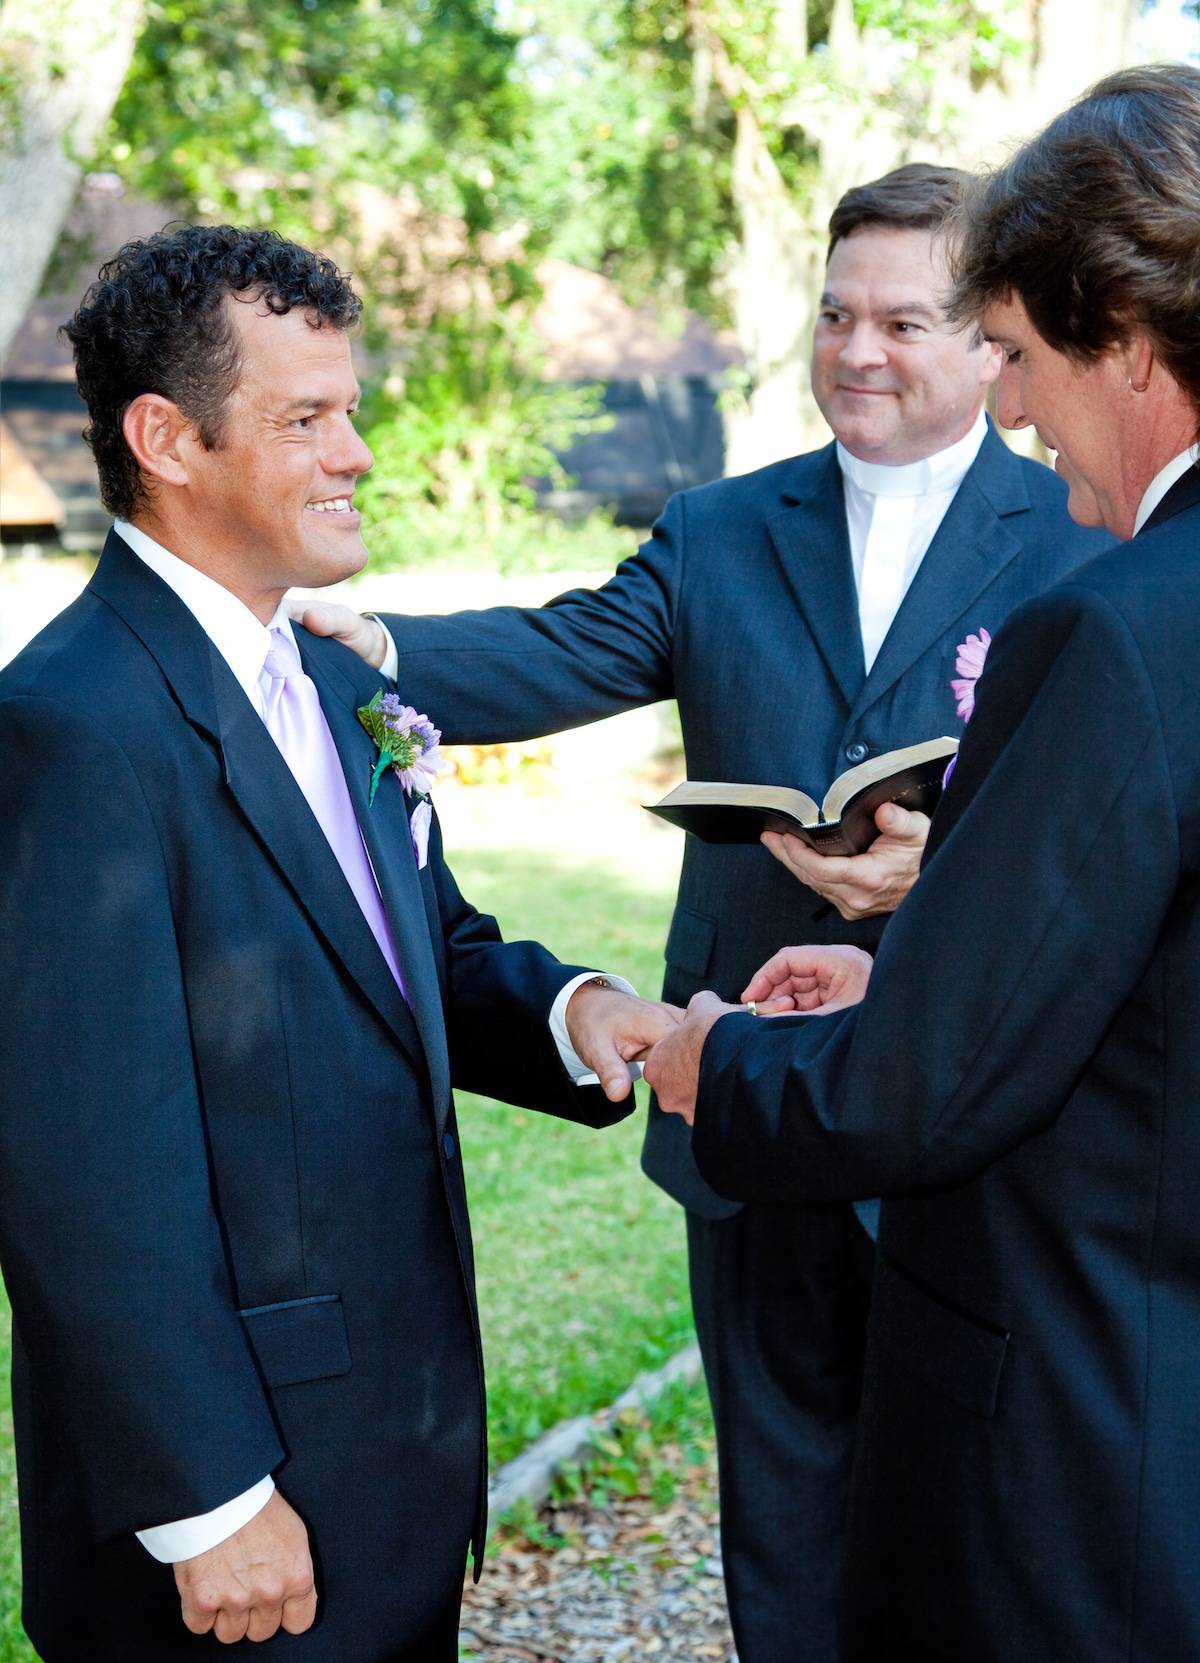 Groom slips a ring on his husband's finger during a gay marriage ceremony.